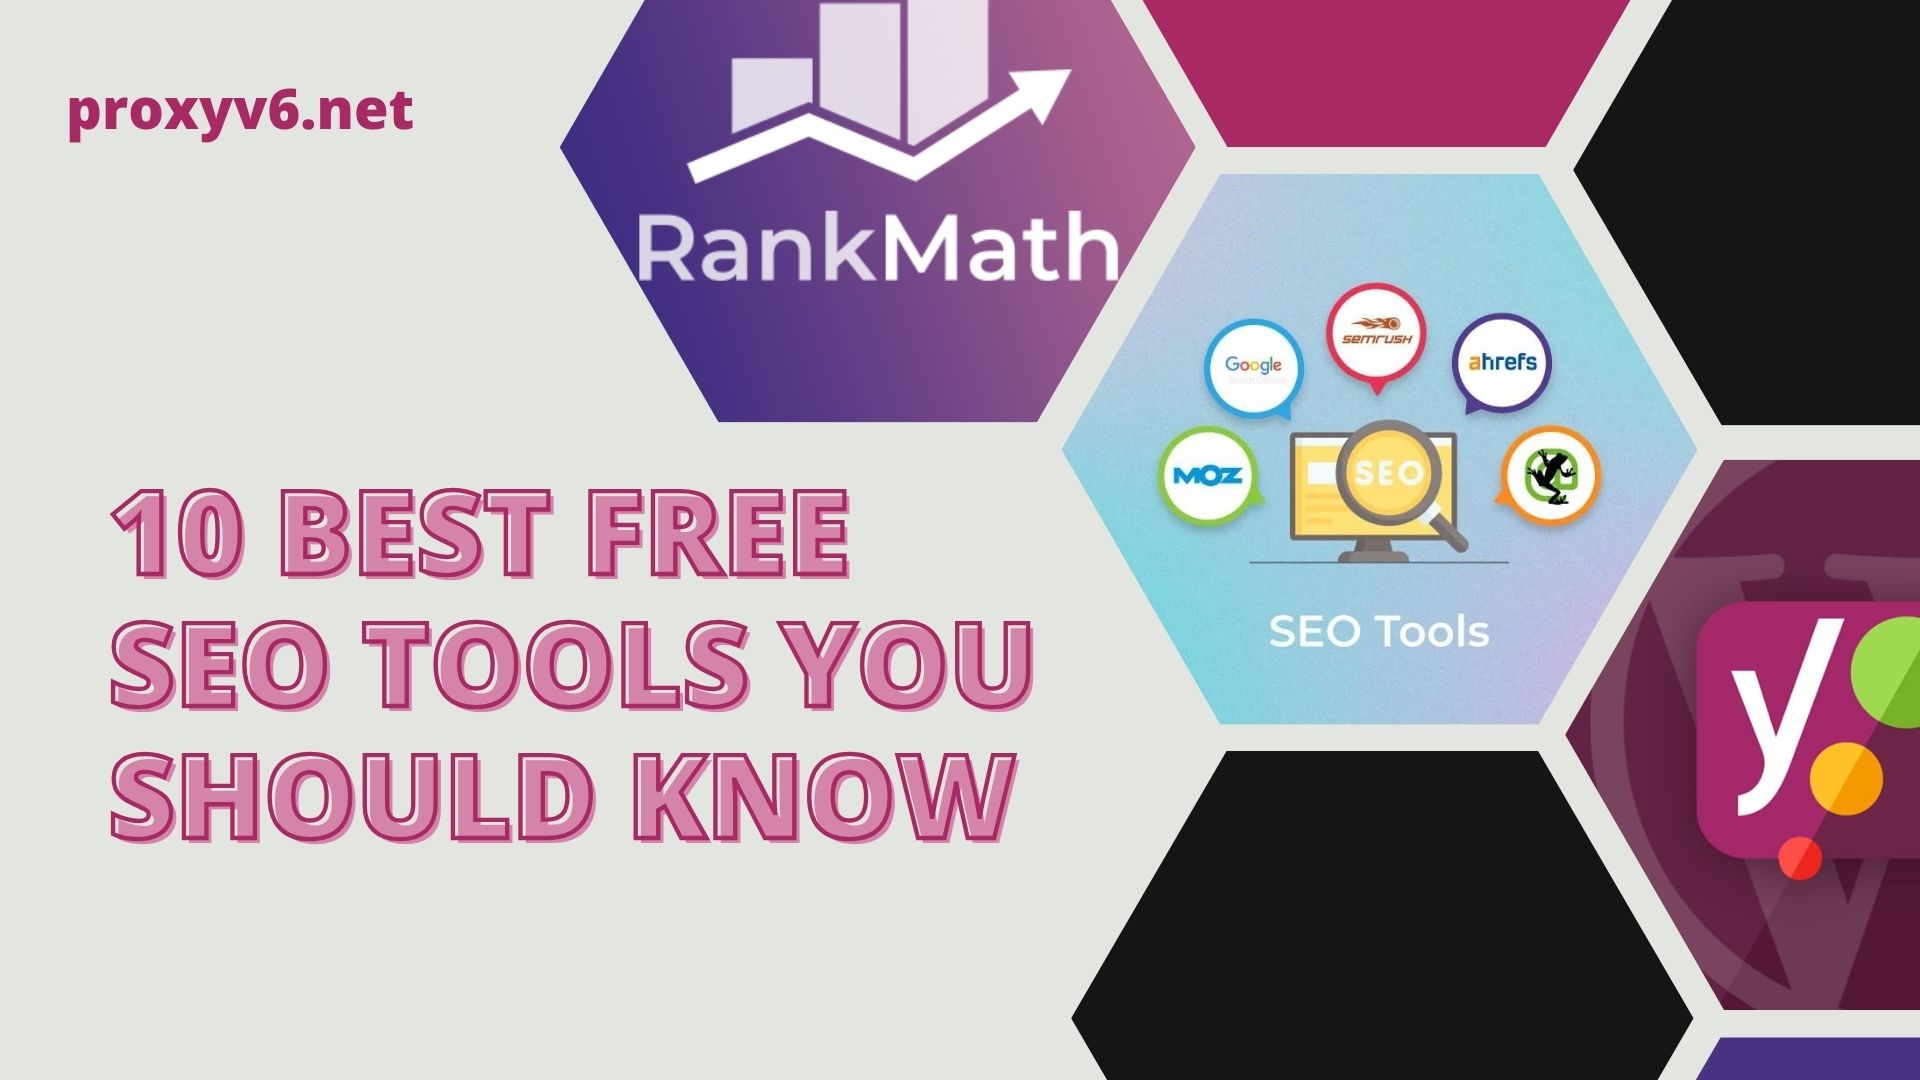 10 best free SEO tools you should know